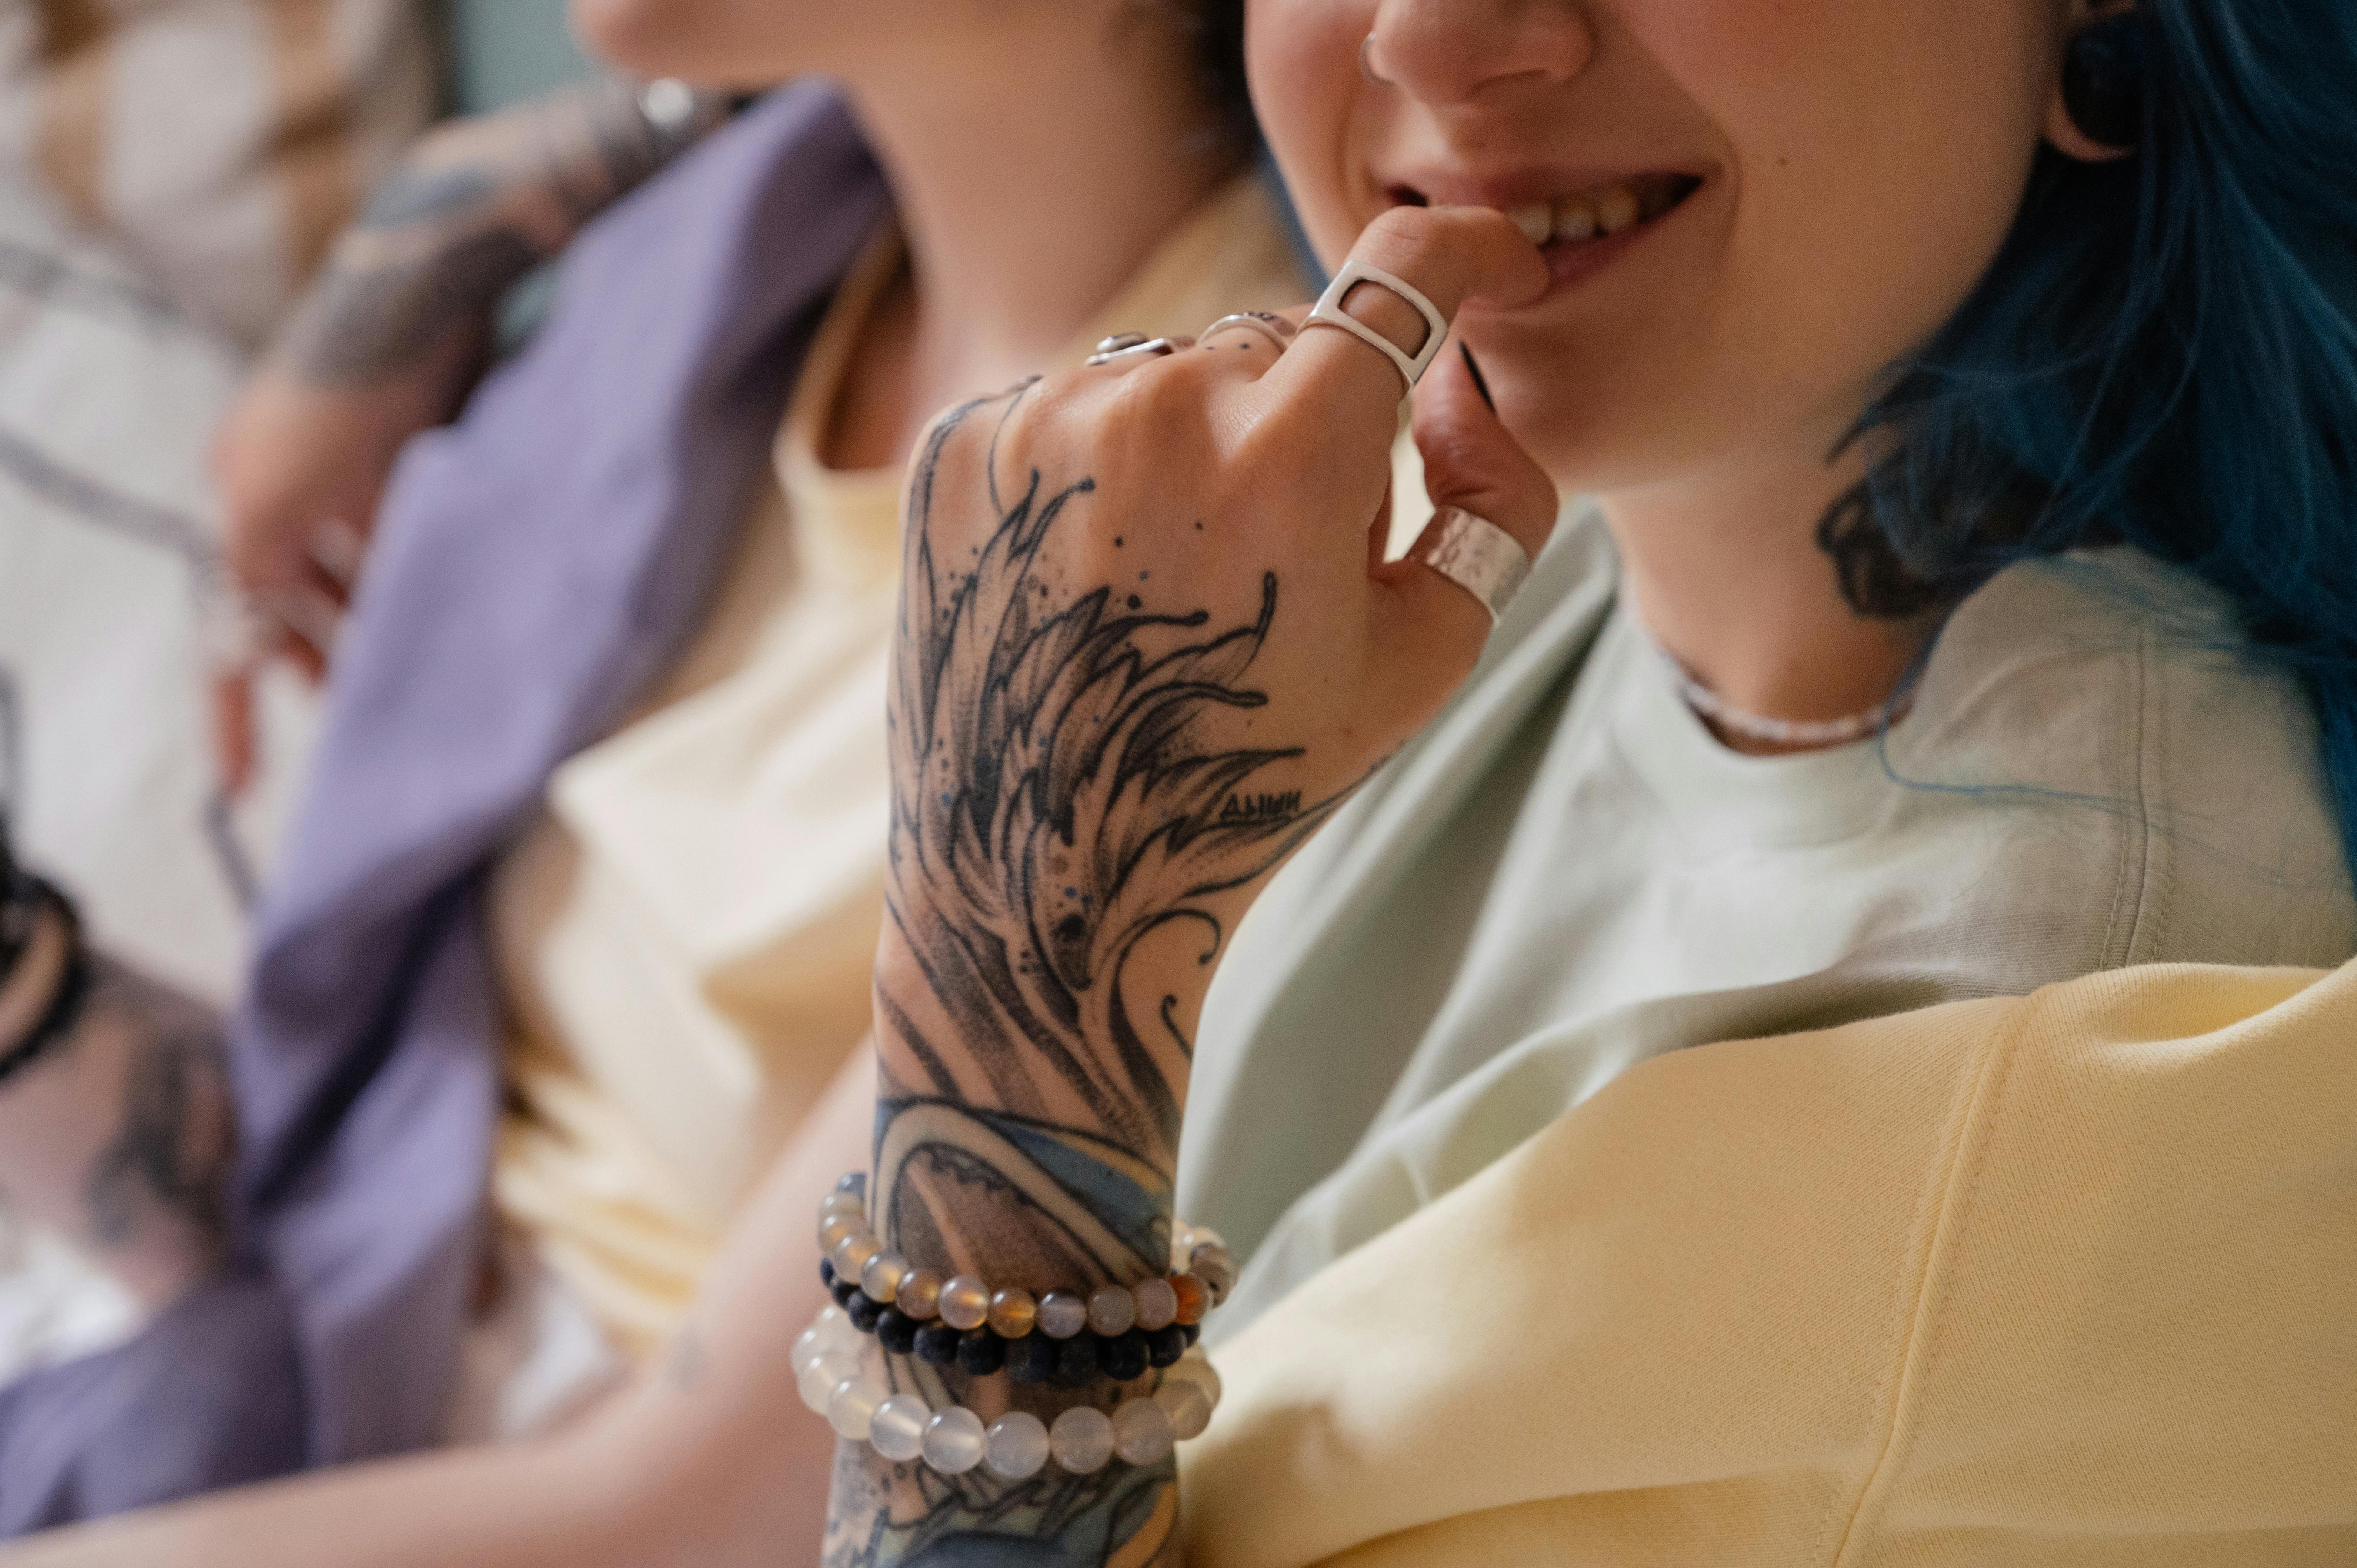 Hand Tattoo Healing: How to Take Care of Your New Tat